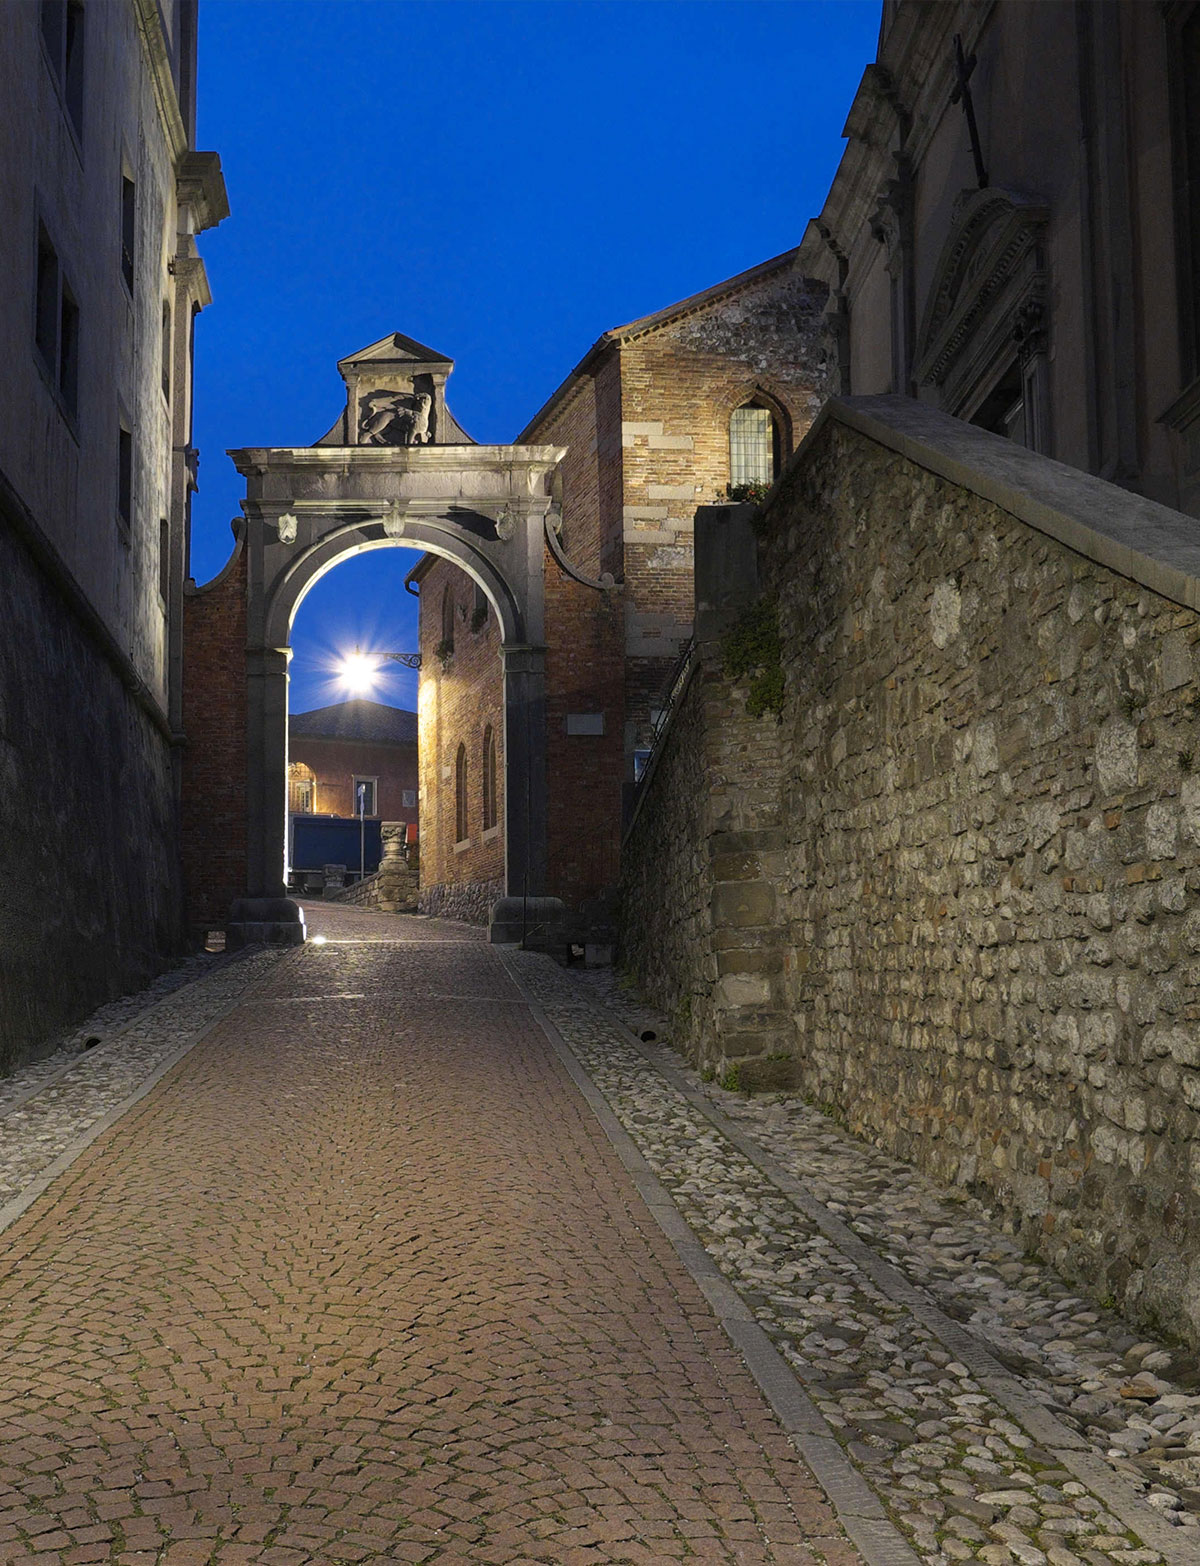 Castle of Udine - The road leading to the Castle